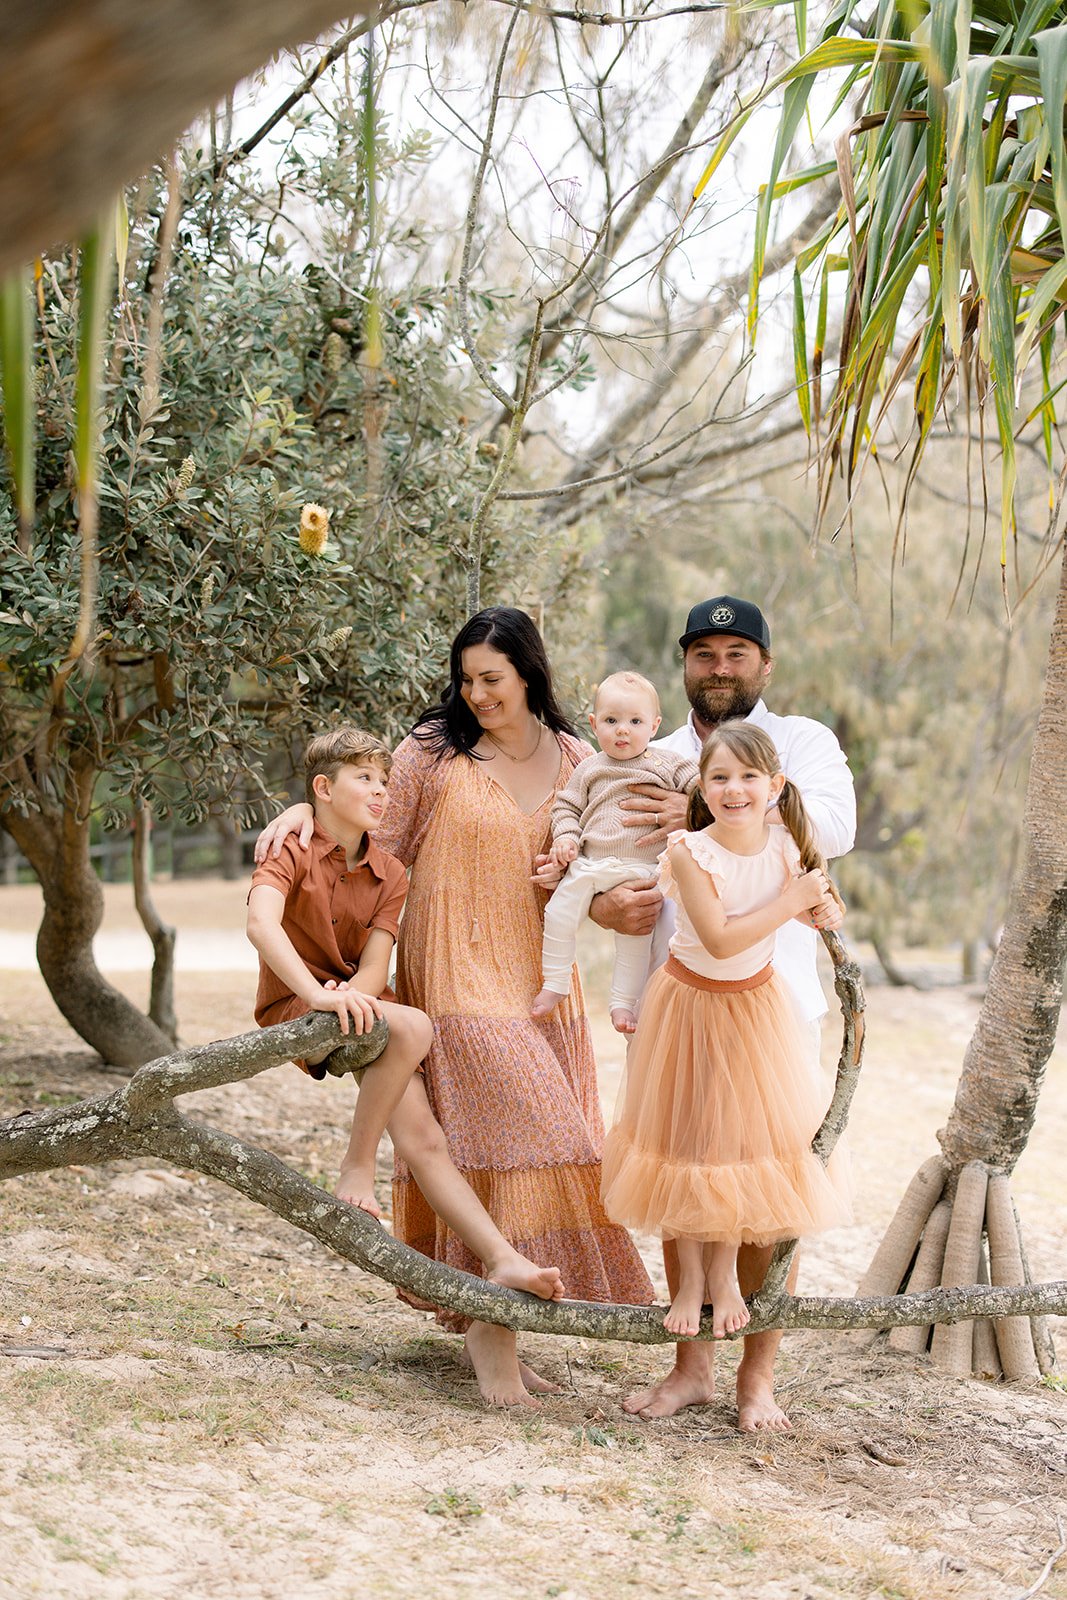 Family smiling together amongst the trees at Noosa beach